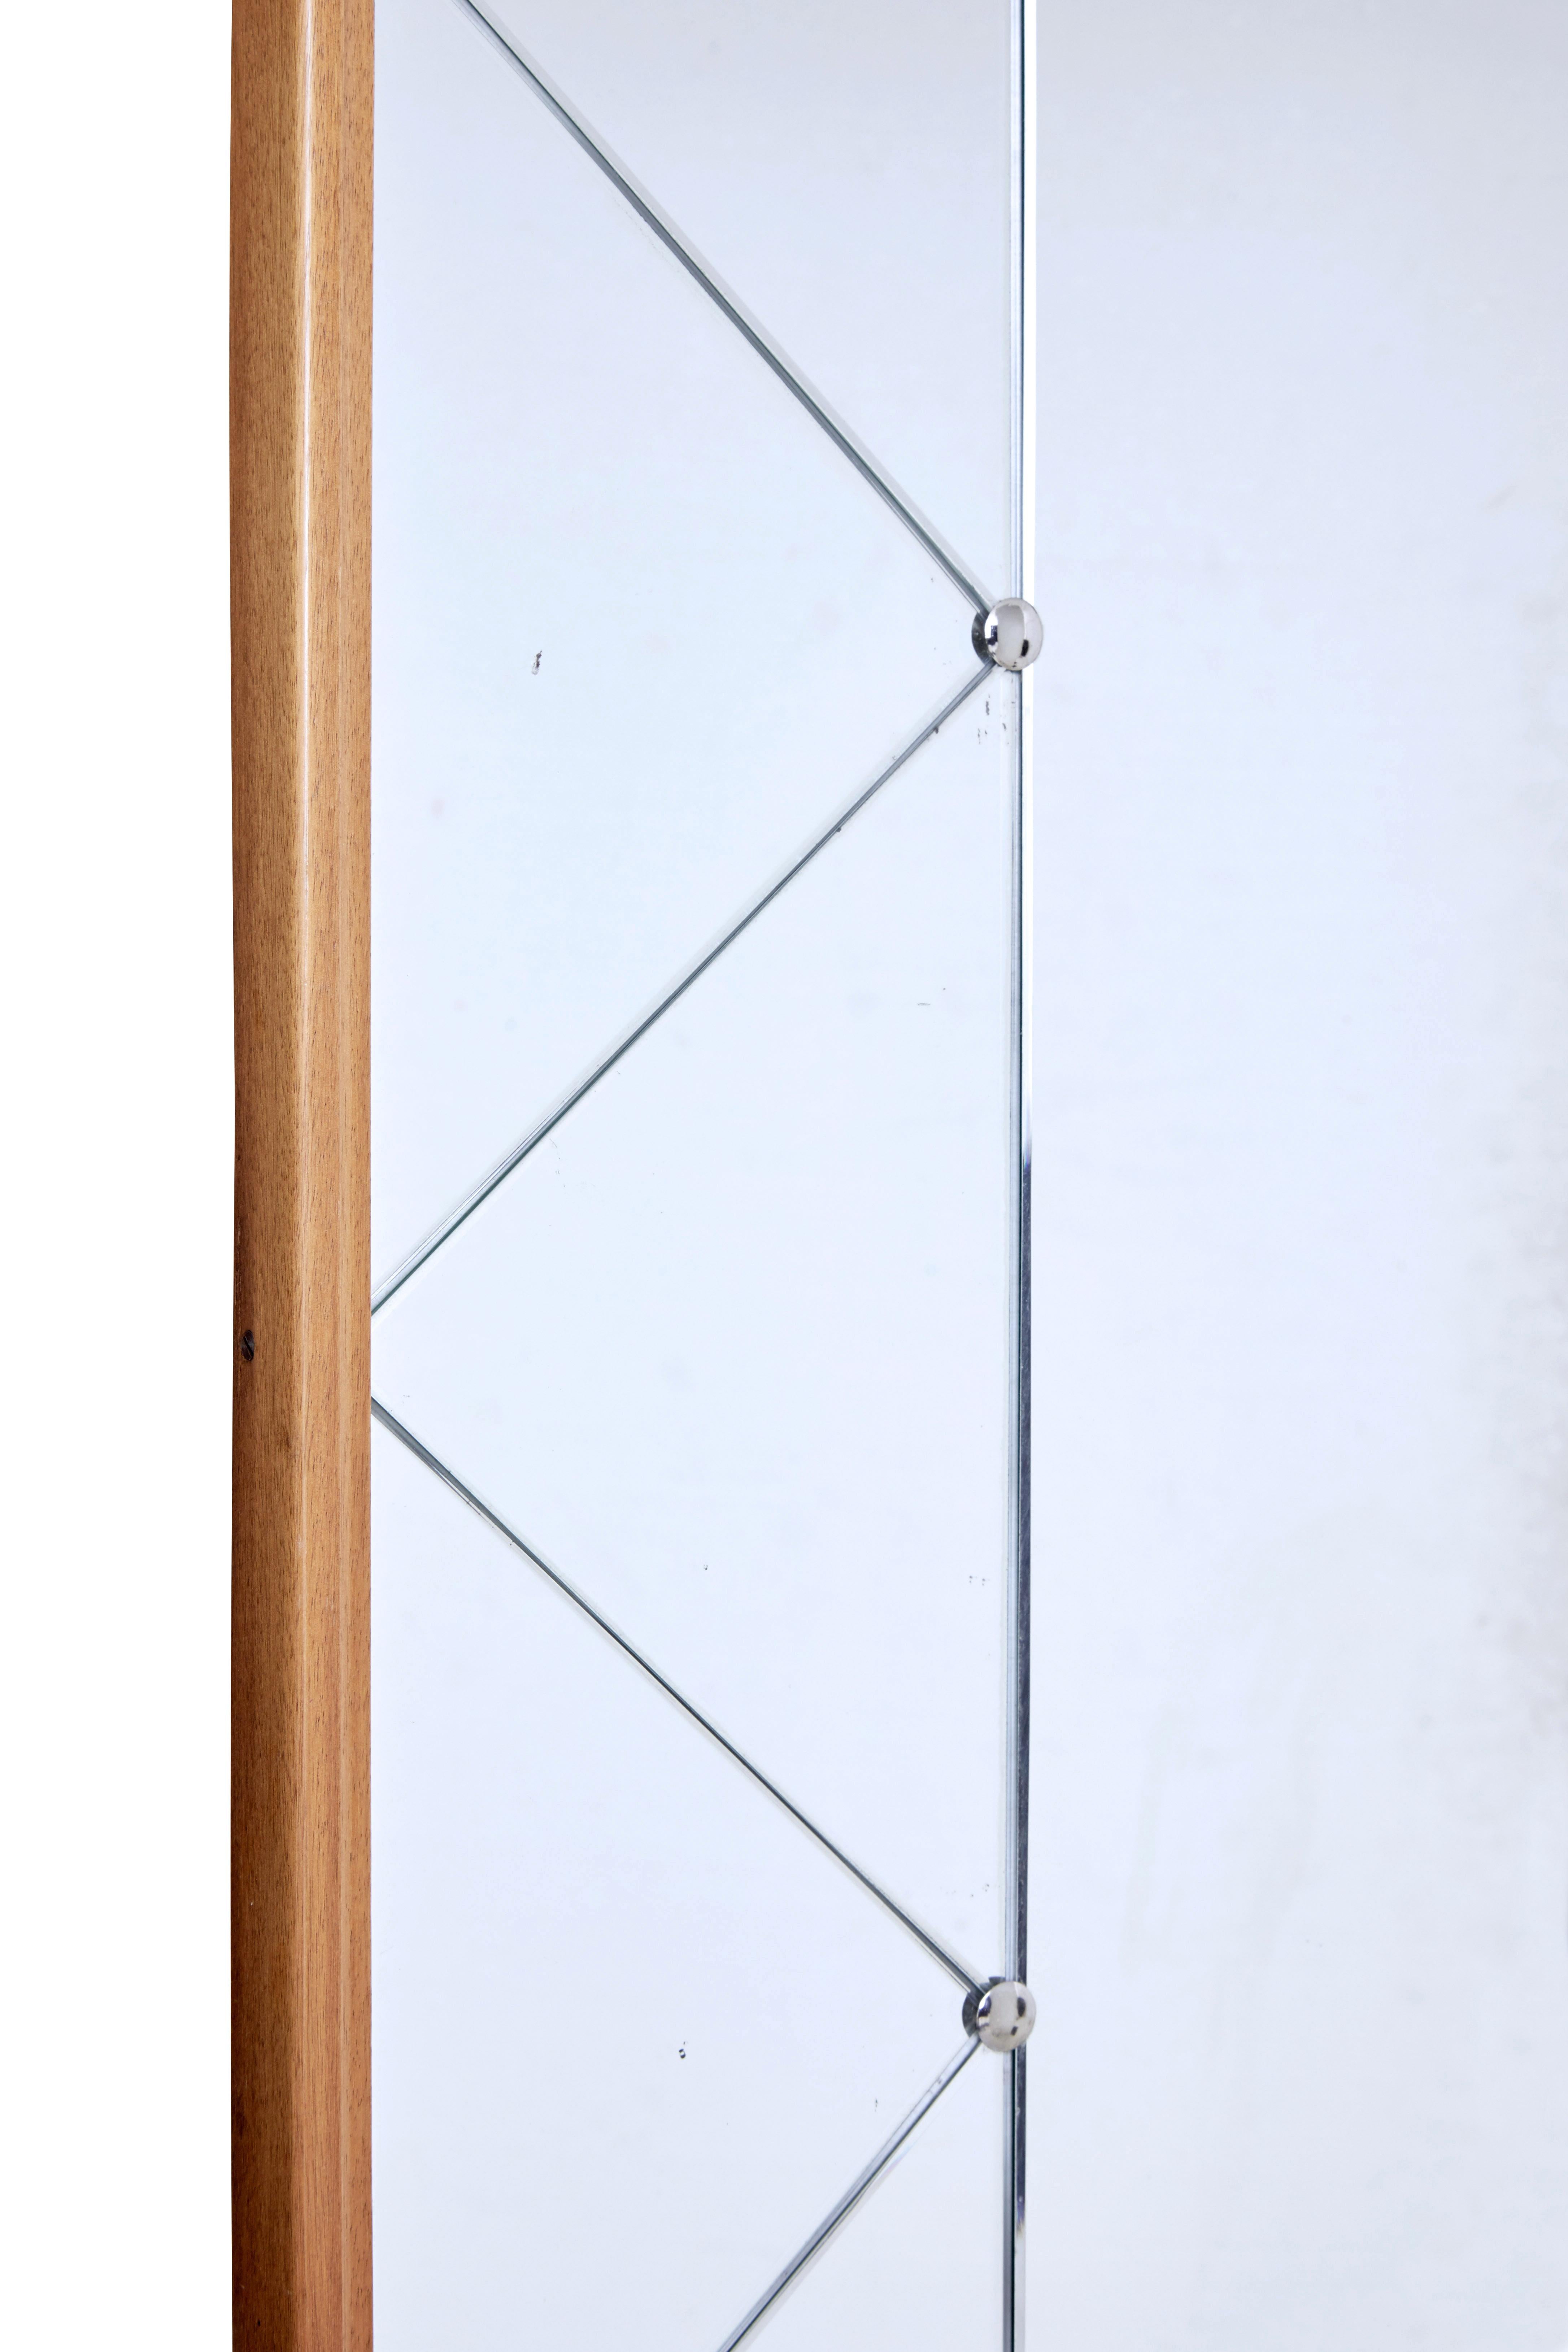 Mid-20th century mirror by G+T Hovmantorp, circa 1960.

Scandinavian Modern wall mirror by Swedish makers glas and tra. Moulded beech frame supports an arrangement of segments and central mirror, held in place by chrome screw in studs.

Minor